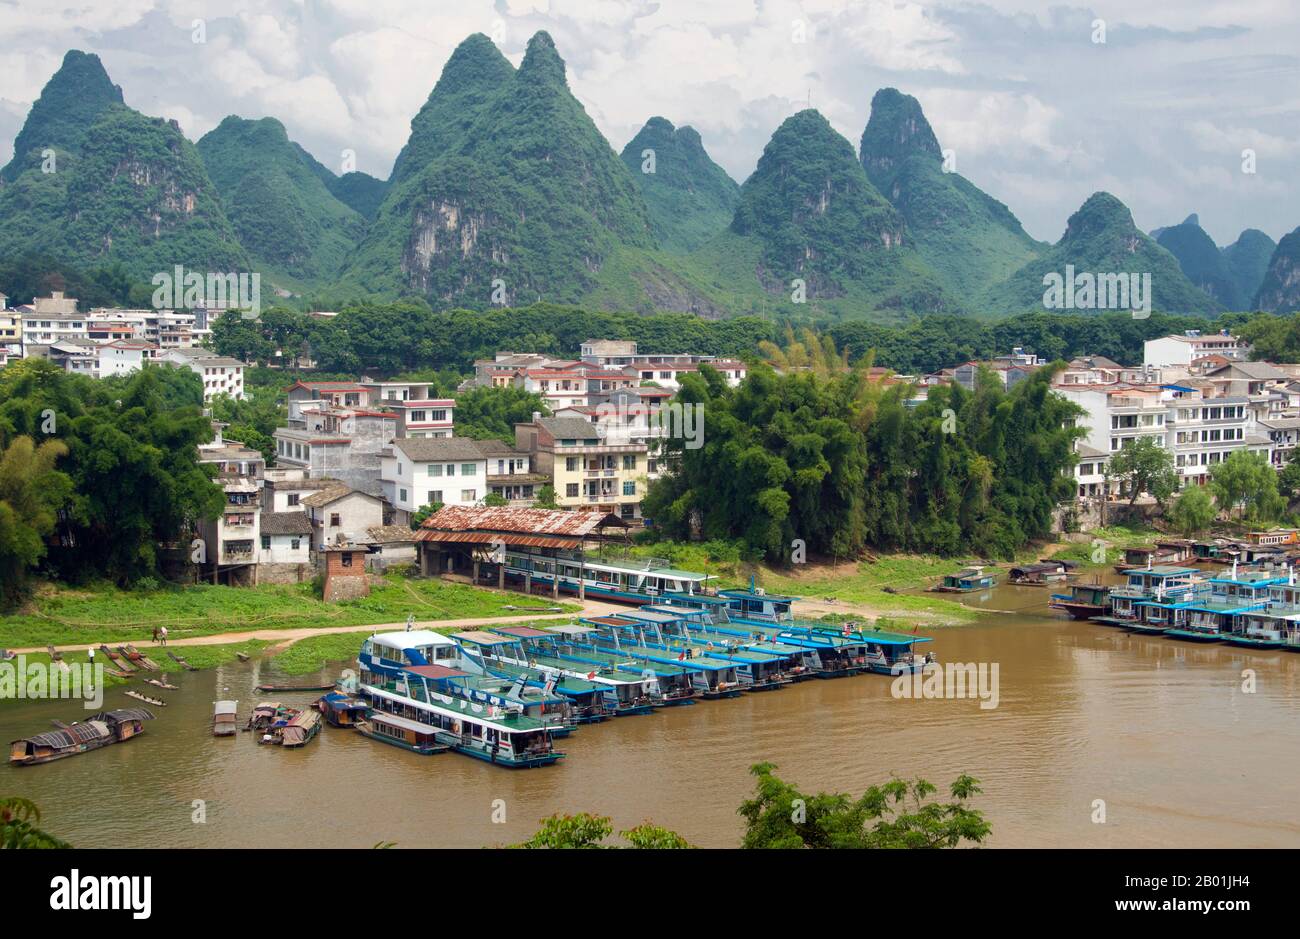 China: Boats on the Li River at Yangshuo, near Guilin, Guangxi Province.  Yangshuo is rightly famous for its dramatic scenery. It lies on the west bank of the Li River (Lijiang) and is just 60 kms downstream from Guilin. Over recent years it has become a popular destination with tourists whilst also retaining its small river town feel.  Guilin is the scene of China’s most famous landscapes, inspiring thousands of paintings over many centuries. The ‘finest mountains and rivers under heaven’ are so inspiring that poets, artists and tourists have made this China’s number one natural attraction. Stock Photo